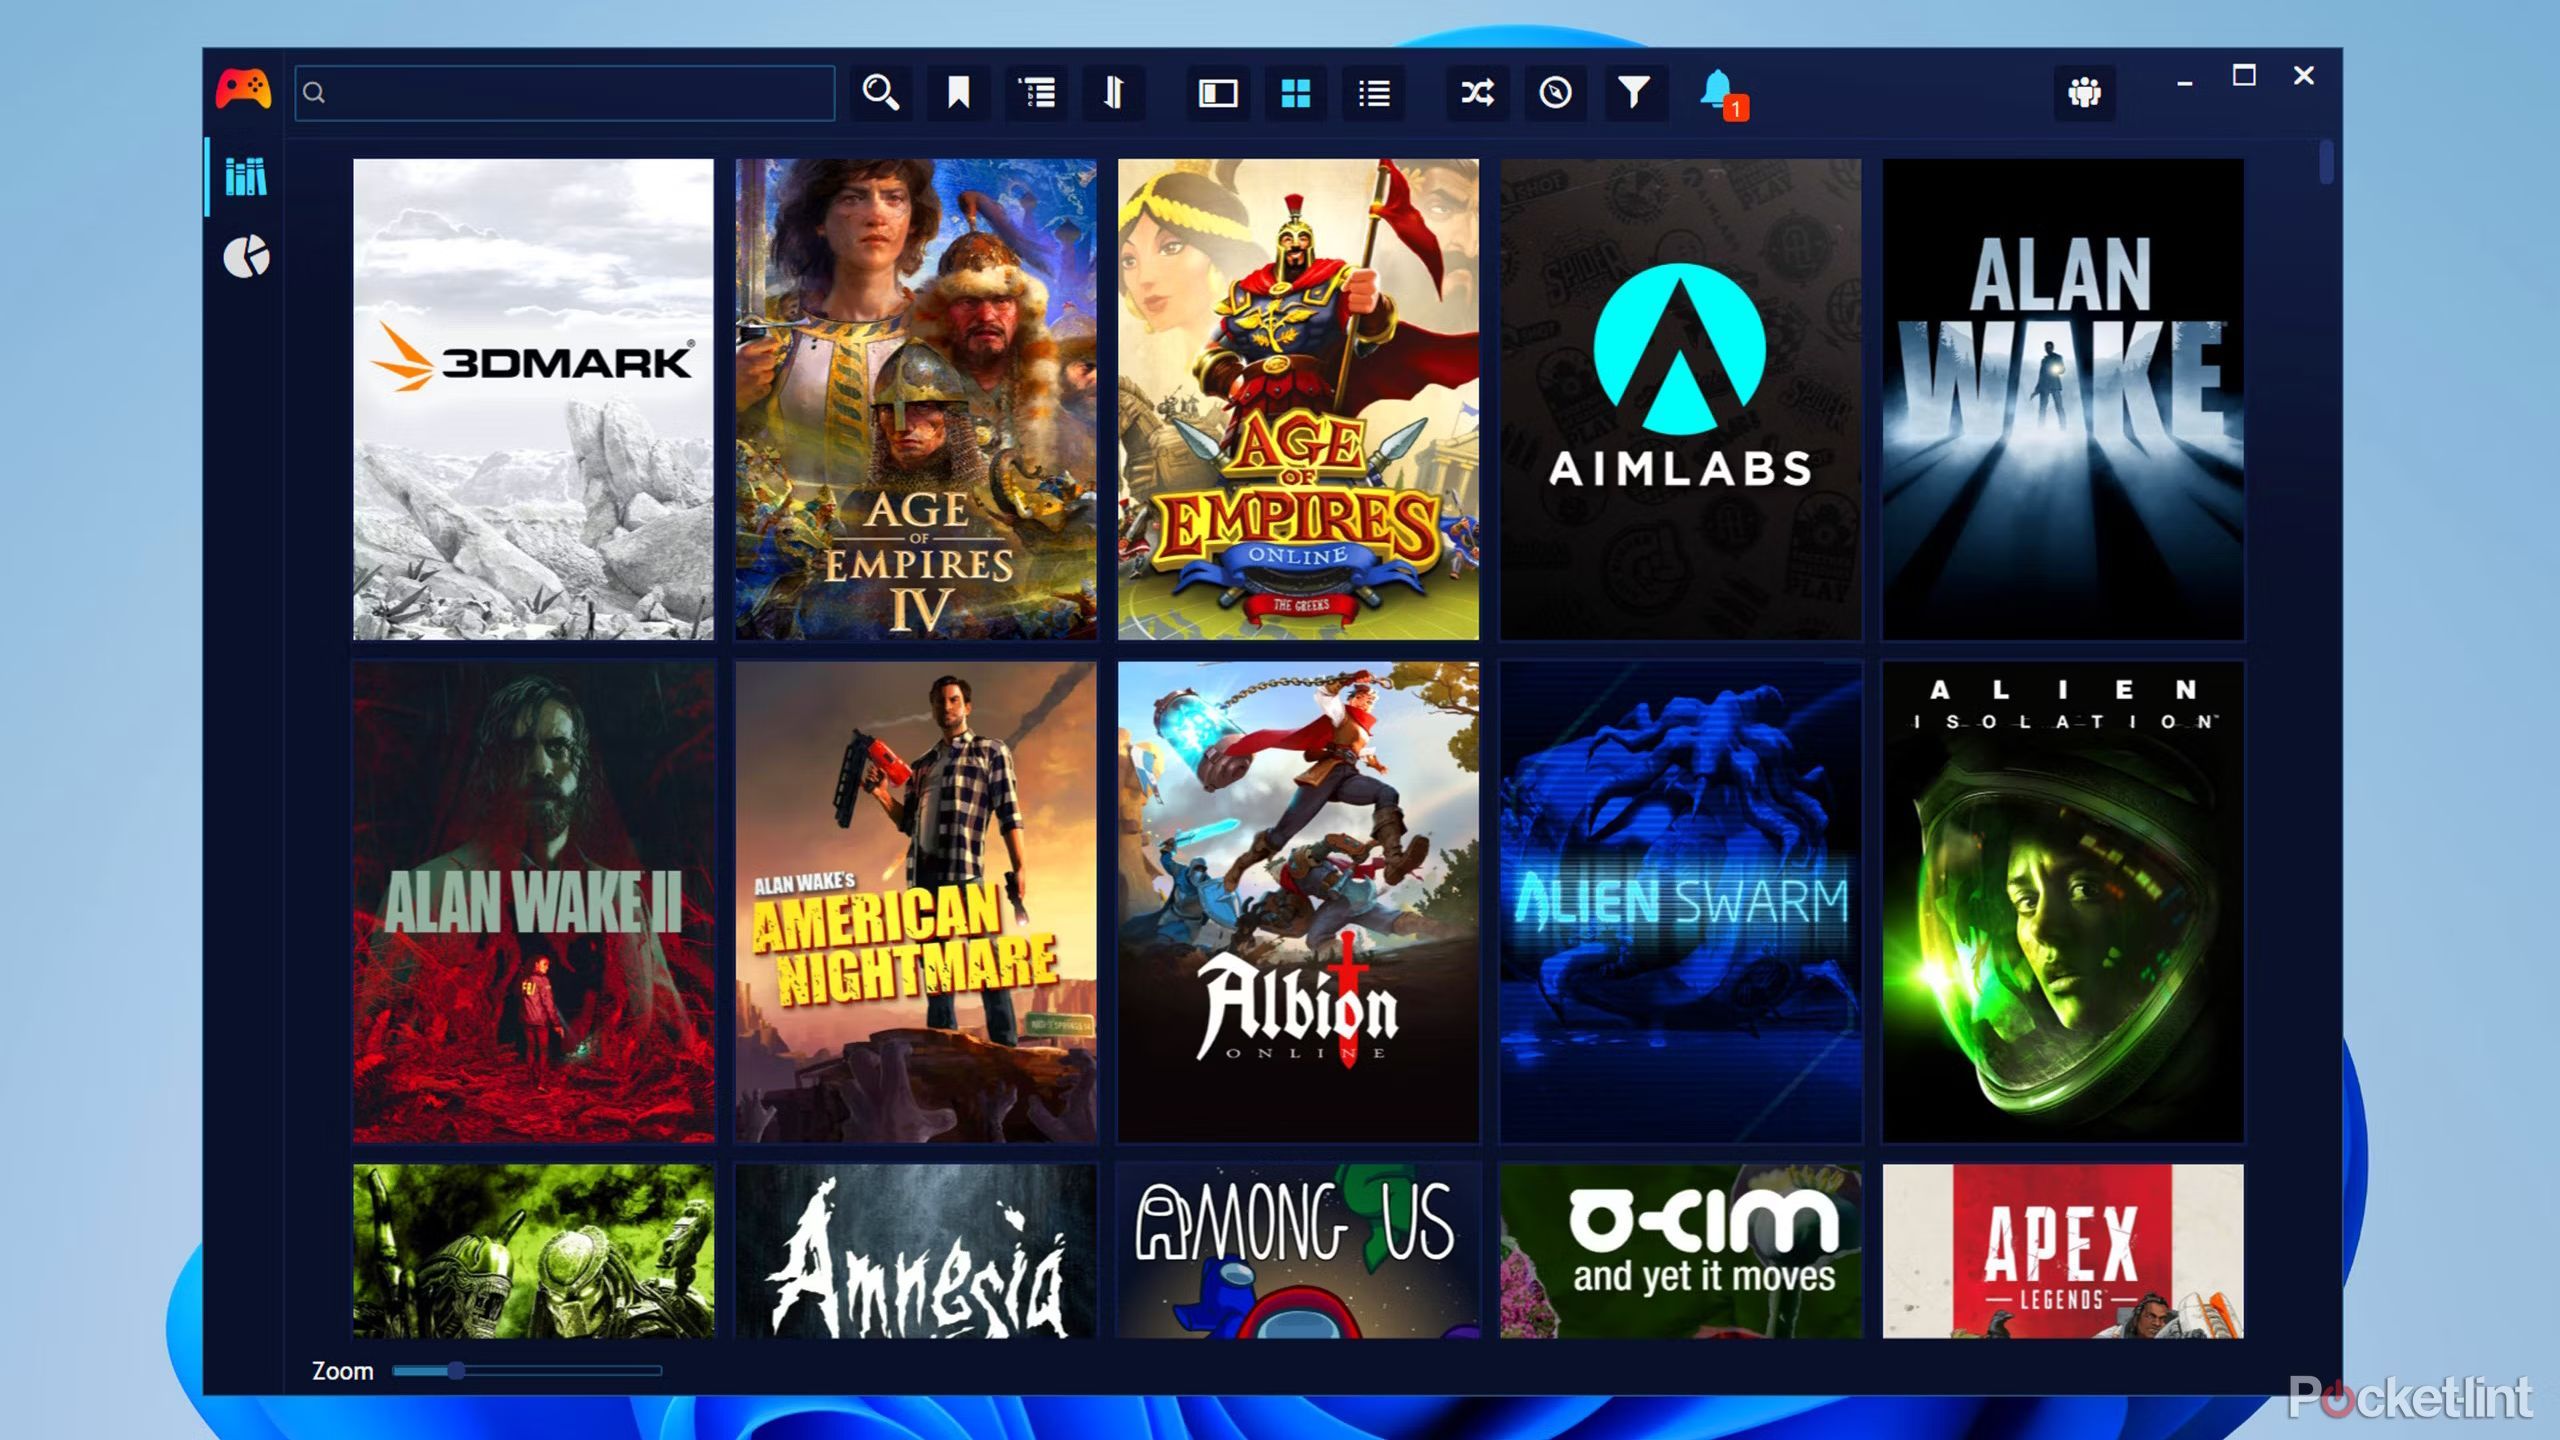 Playnite unified launcher hub for PC games running on Windows 11 desktop.